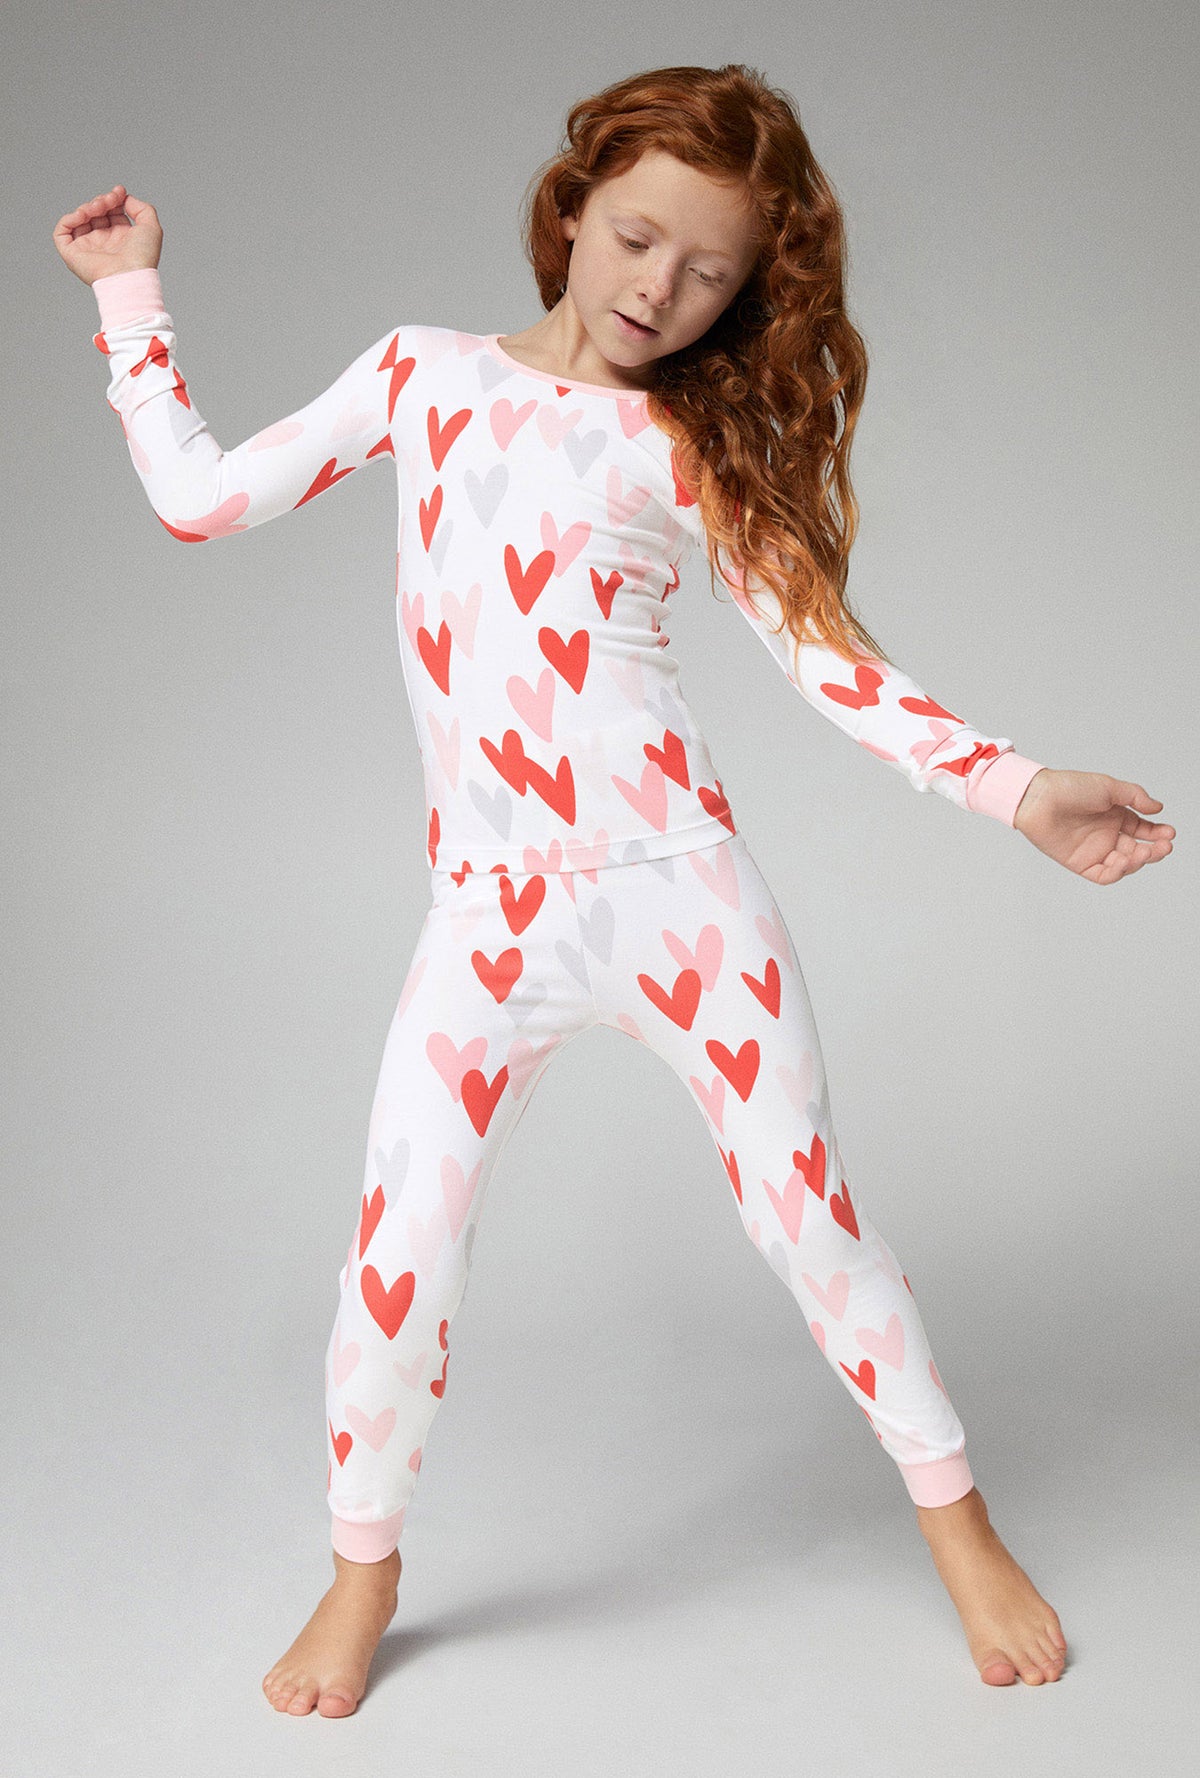 A girl wearing white long sleeve stretch jersey pj set with pink and red hearts print